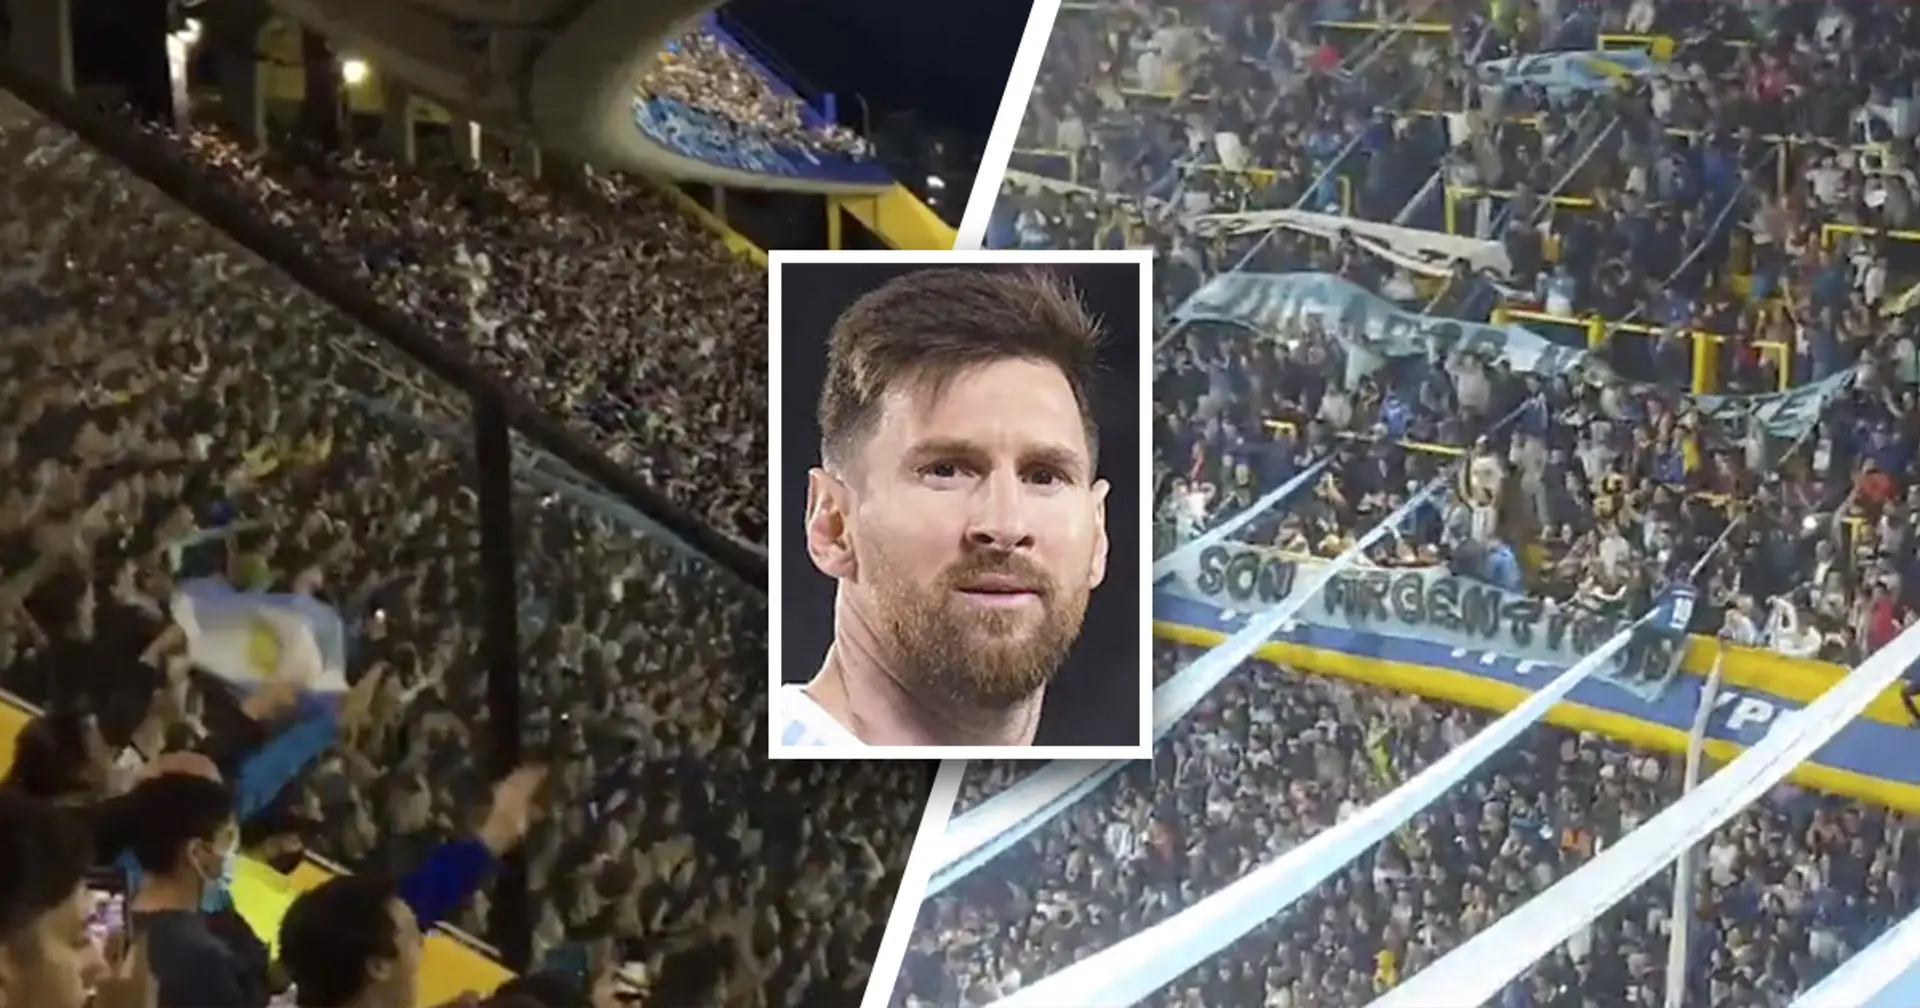 'Show this to PSG fans': Argentina's royal treatment of Messi in latest match